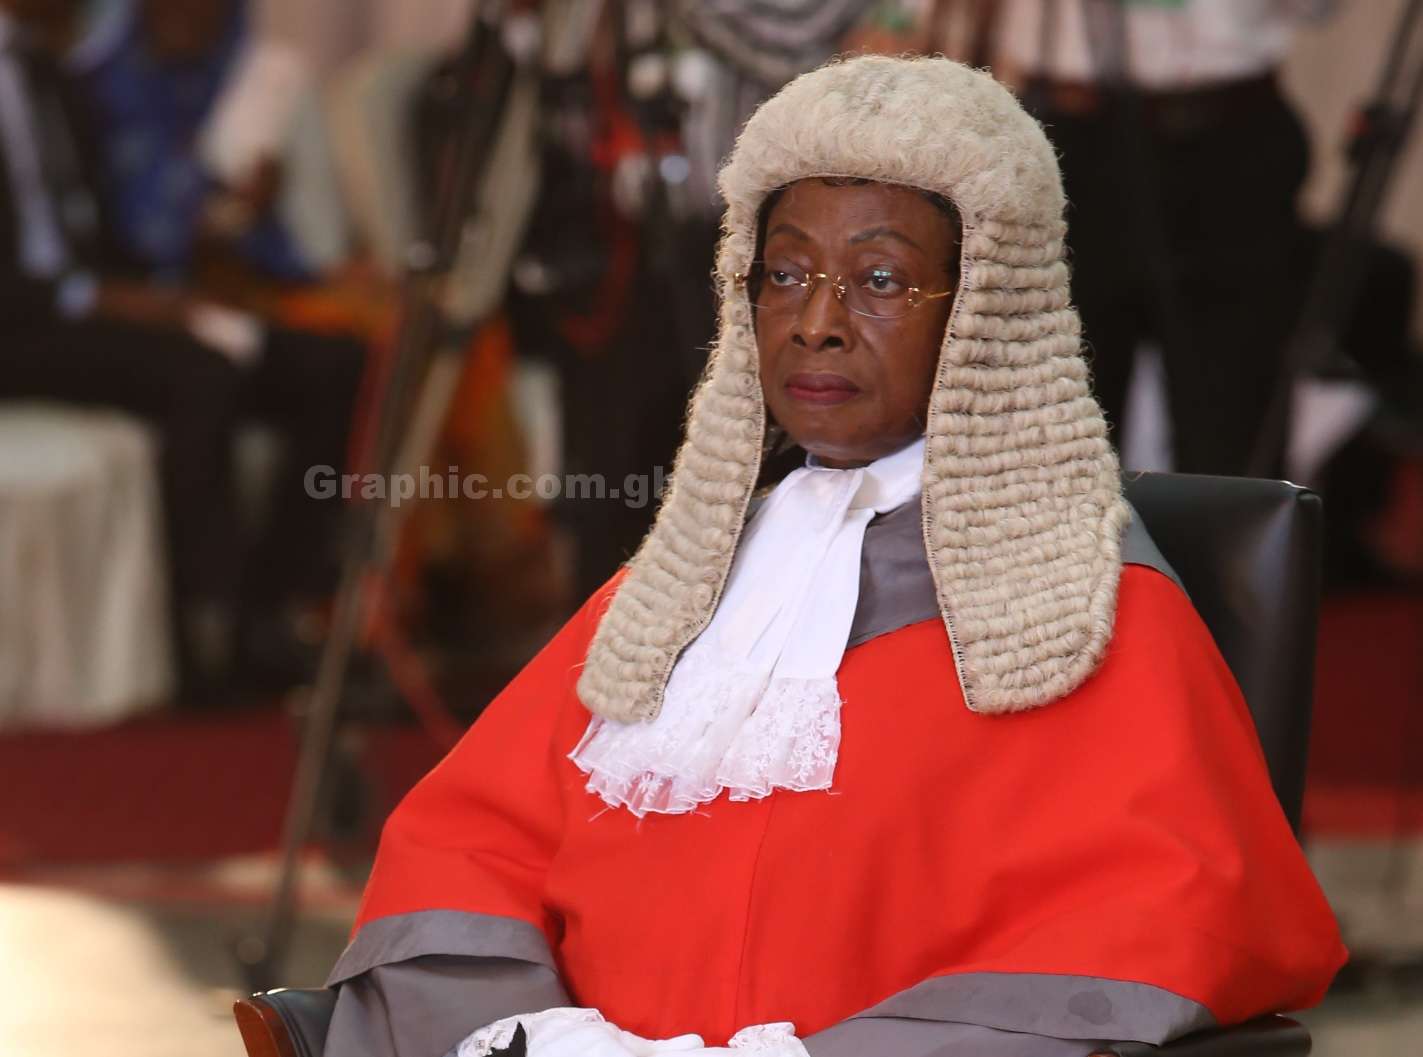 The Chief Justice, Ms Justice Sophia Akuffo